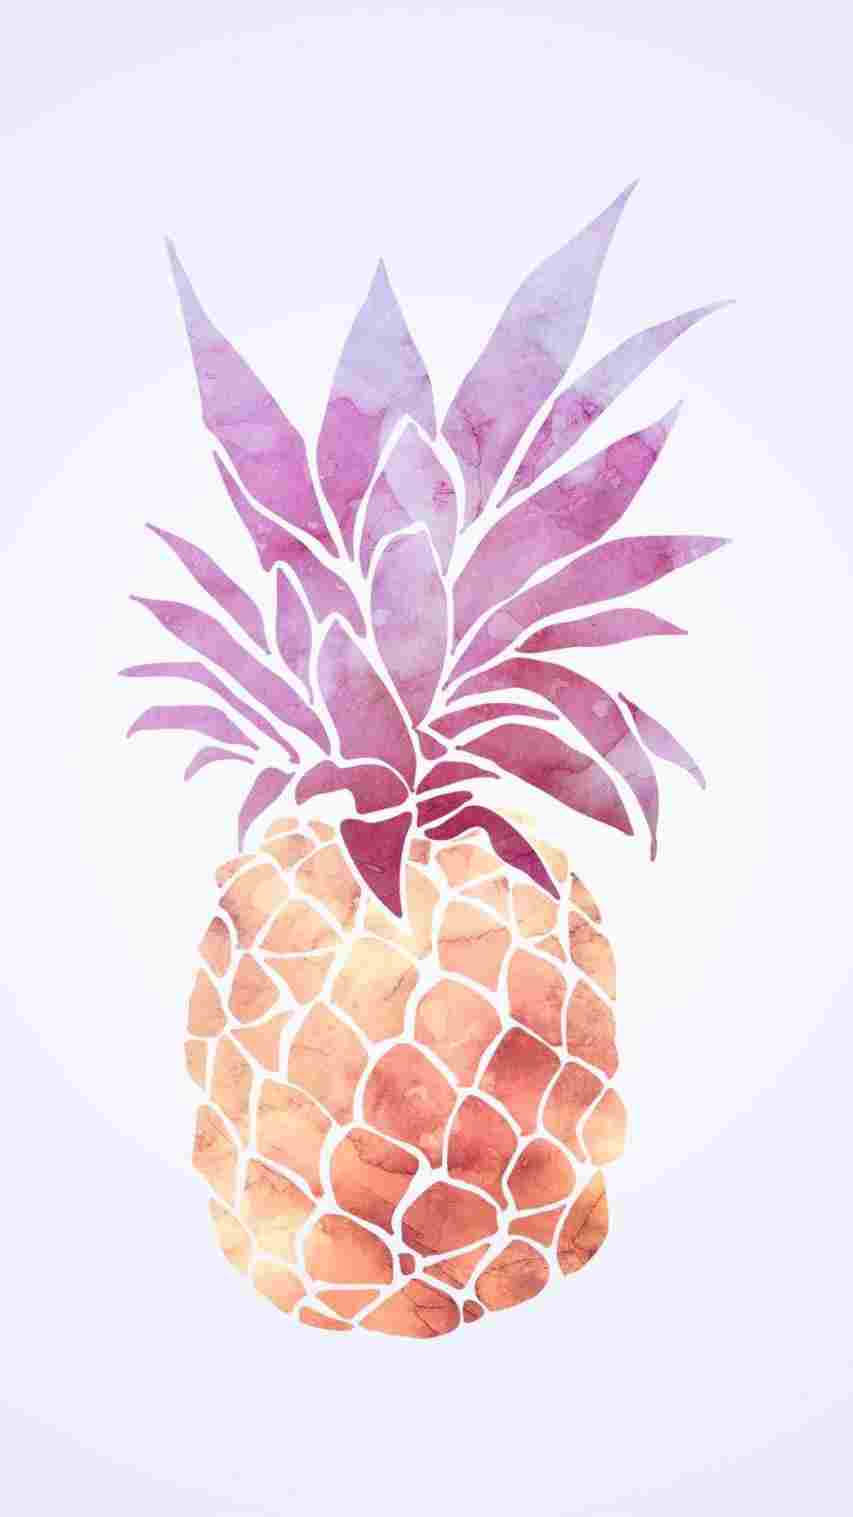 Pineapple-Shaped Iphone Wallpaper